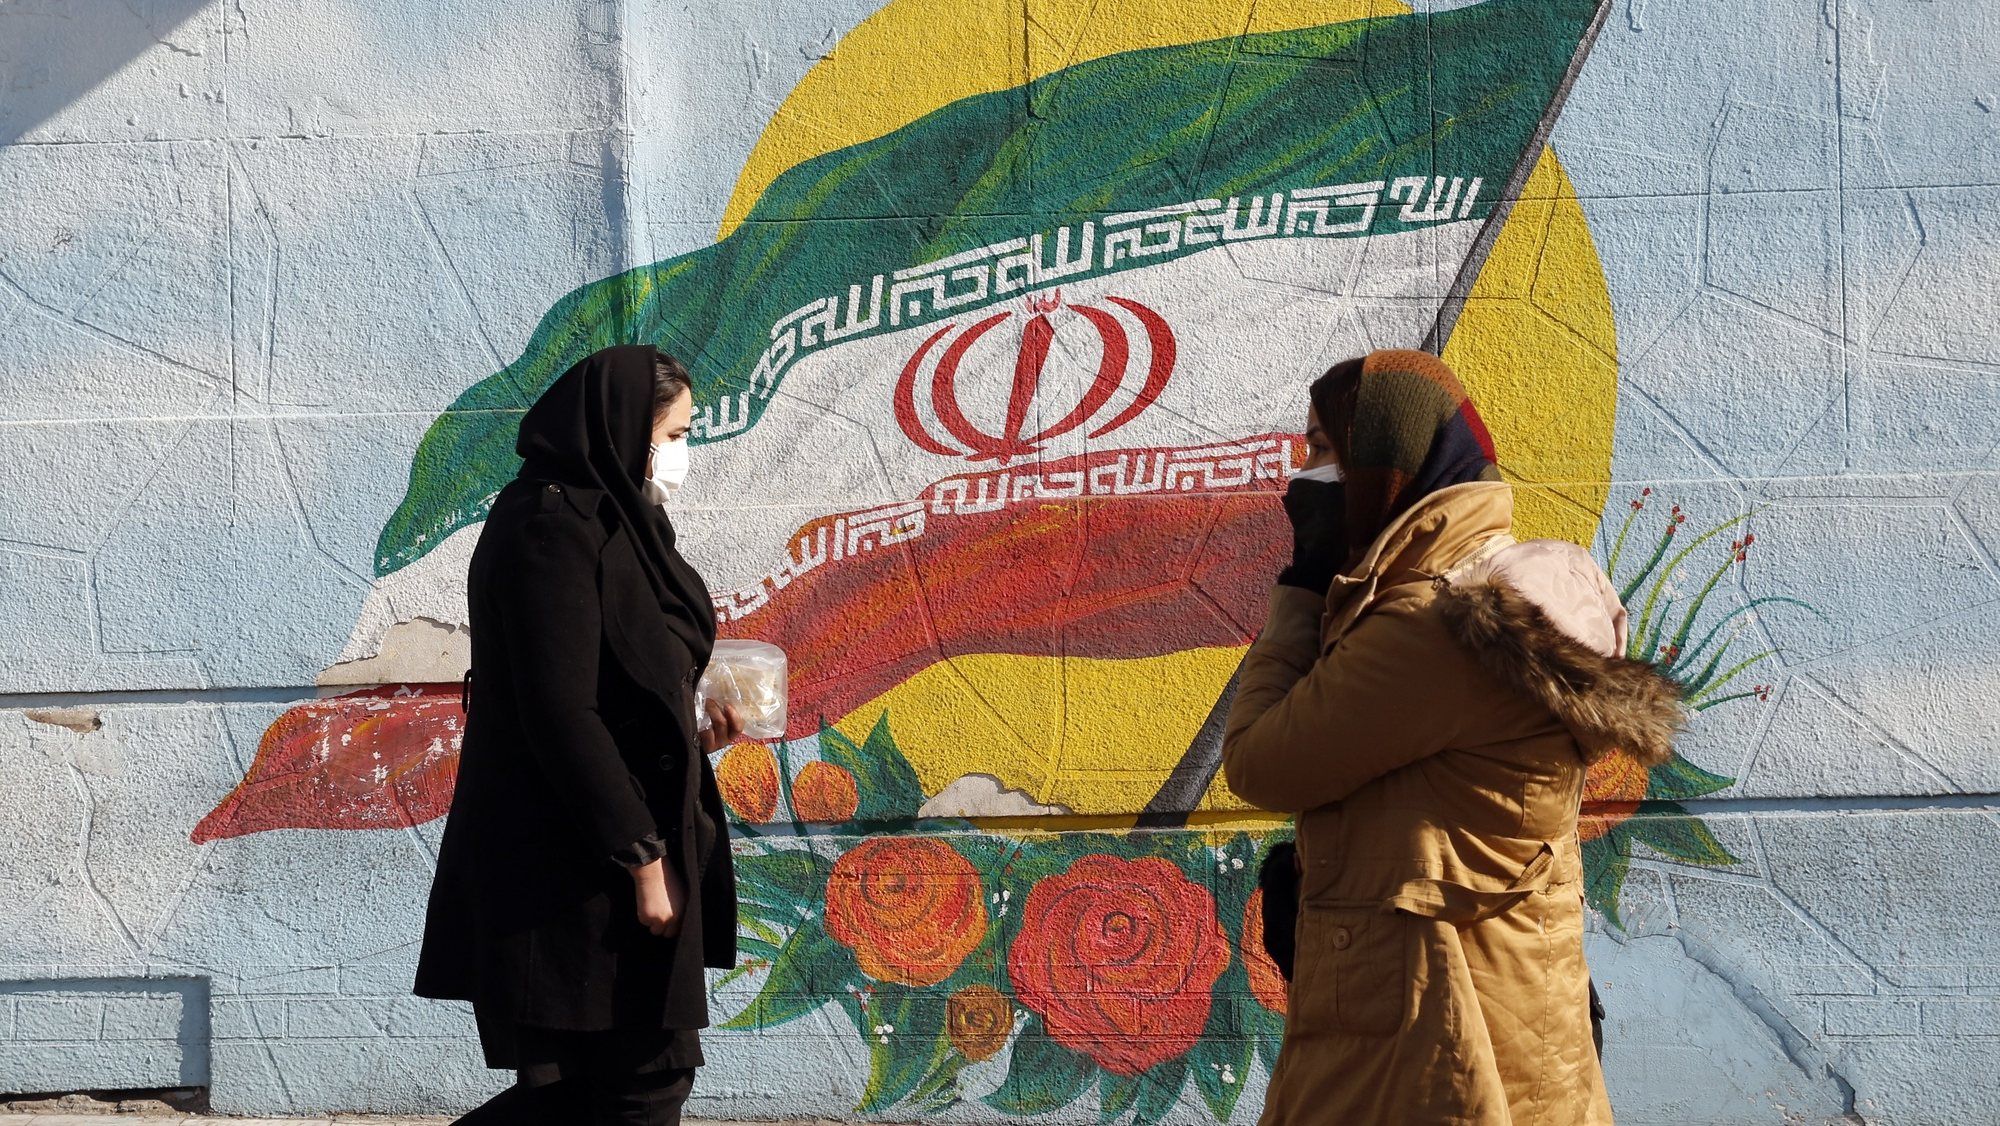 epa09701867 Iranians walk past next to a wall painting of Iran’s national flag in a street in Tehran, Iran, 22 January 2022. As nuclear talks between Iran and world powers is going on in Vienna, Austria, according to Tasnim news agency Iran denied on 22 January any interim agreement in Vienna as saying they are looking for durable and reliable agreement. Iranians hope that sanctions will be lifted as the country is facing high economic crisis over the sanctions by US and world over Iran&#039;s nuclear program.  EPA/ABEDIN TAHERKENAREH